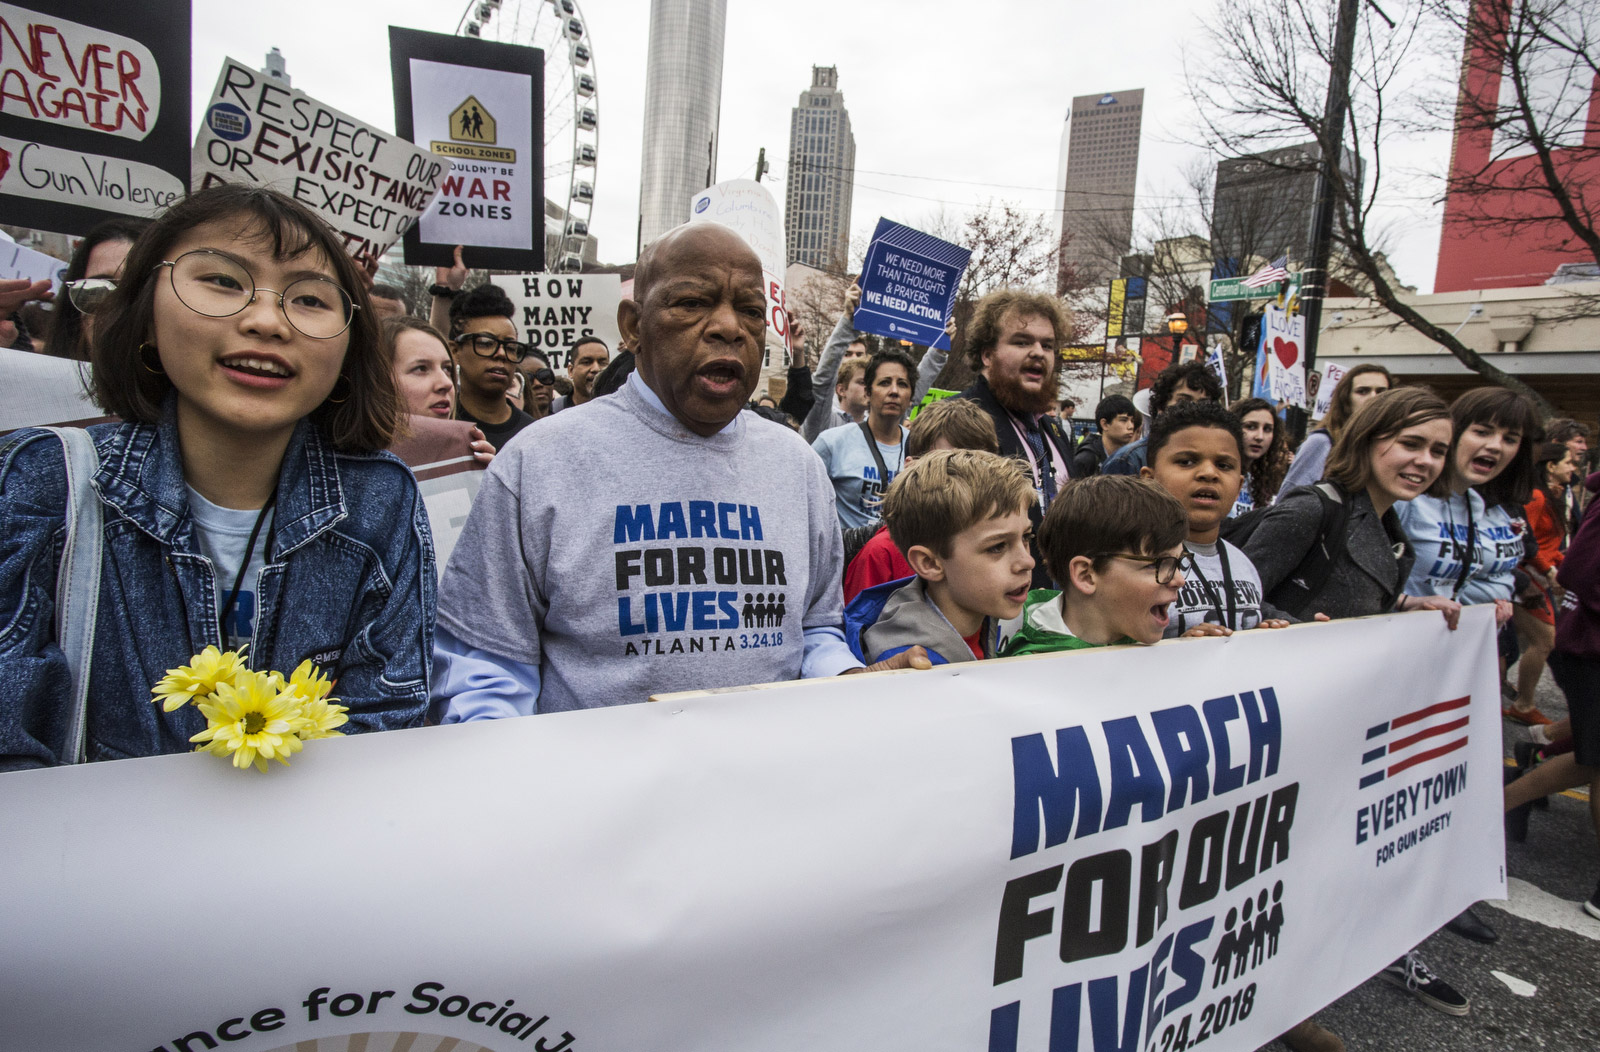 In pictures: The March for Our Lives protests